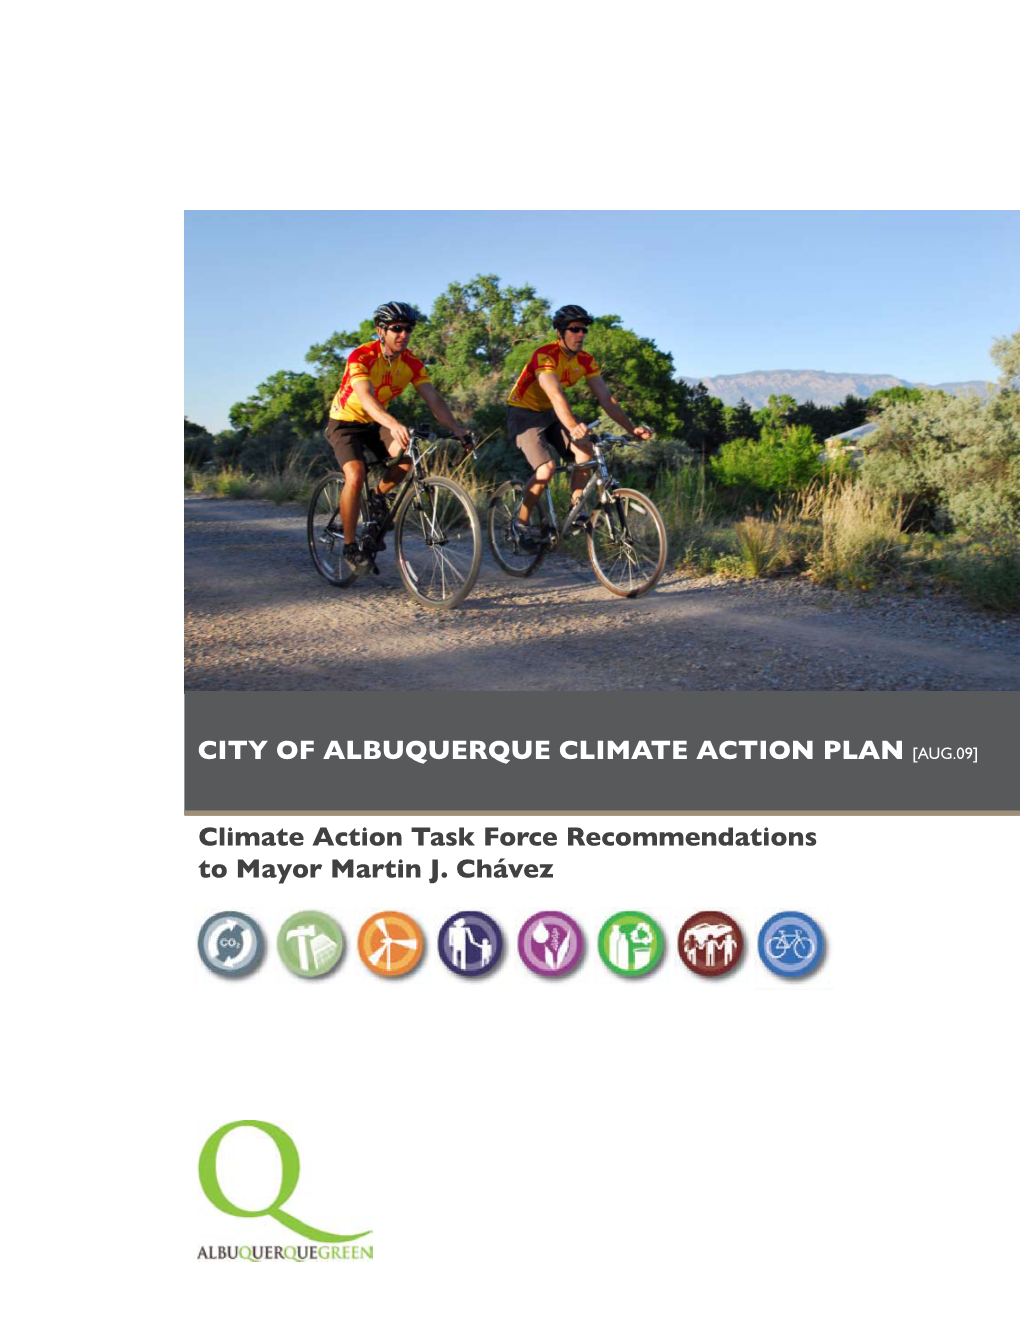 2009 Climate Action Plan